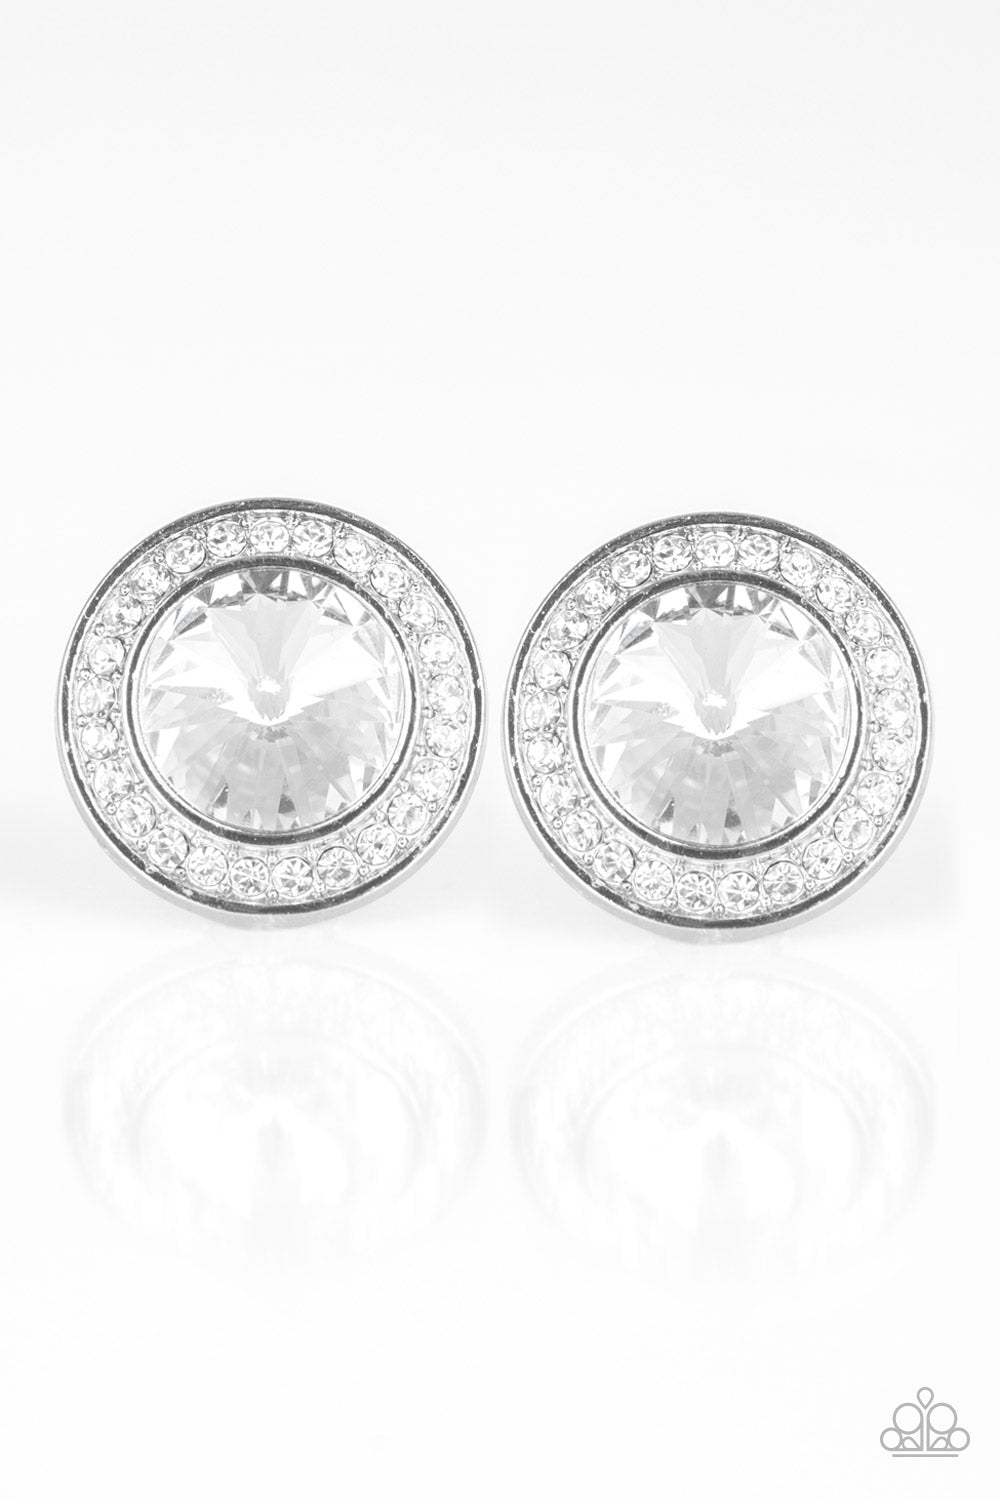 Paparazzi Accessories - What Should I BLING? - White Earrings